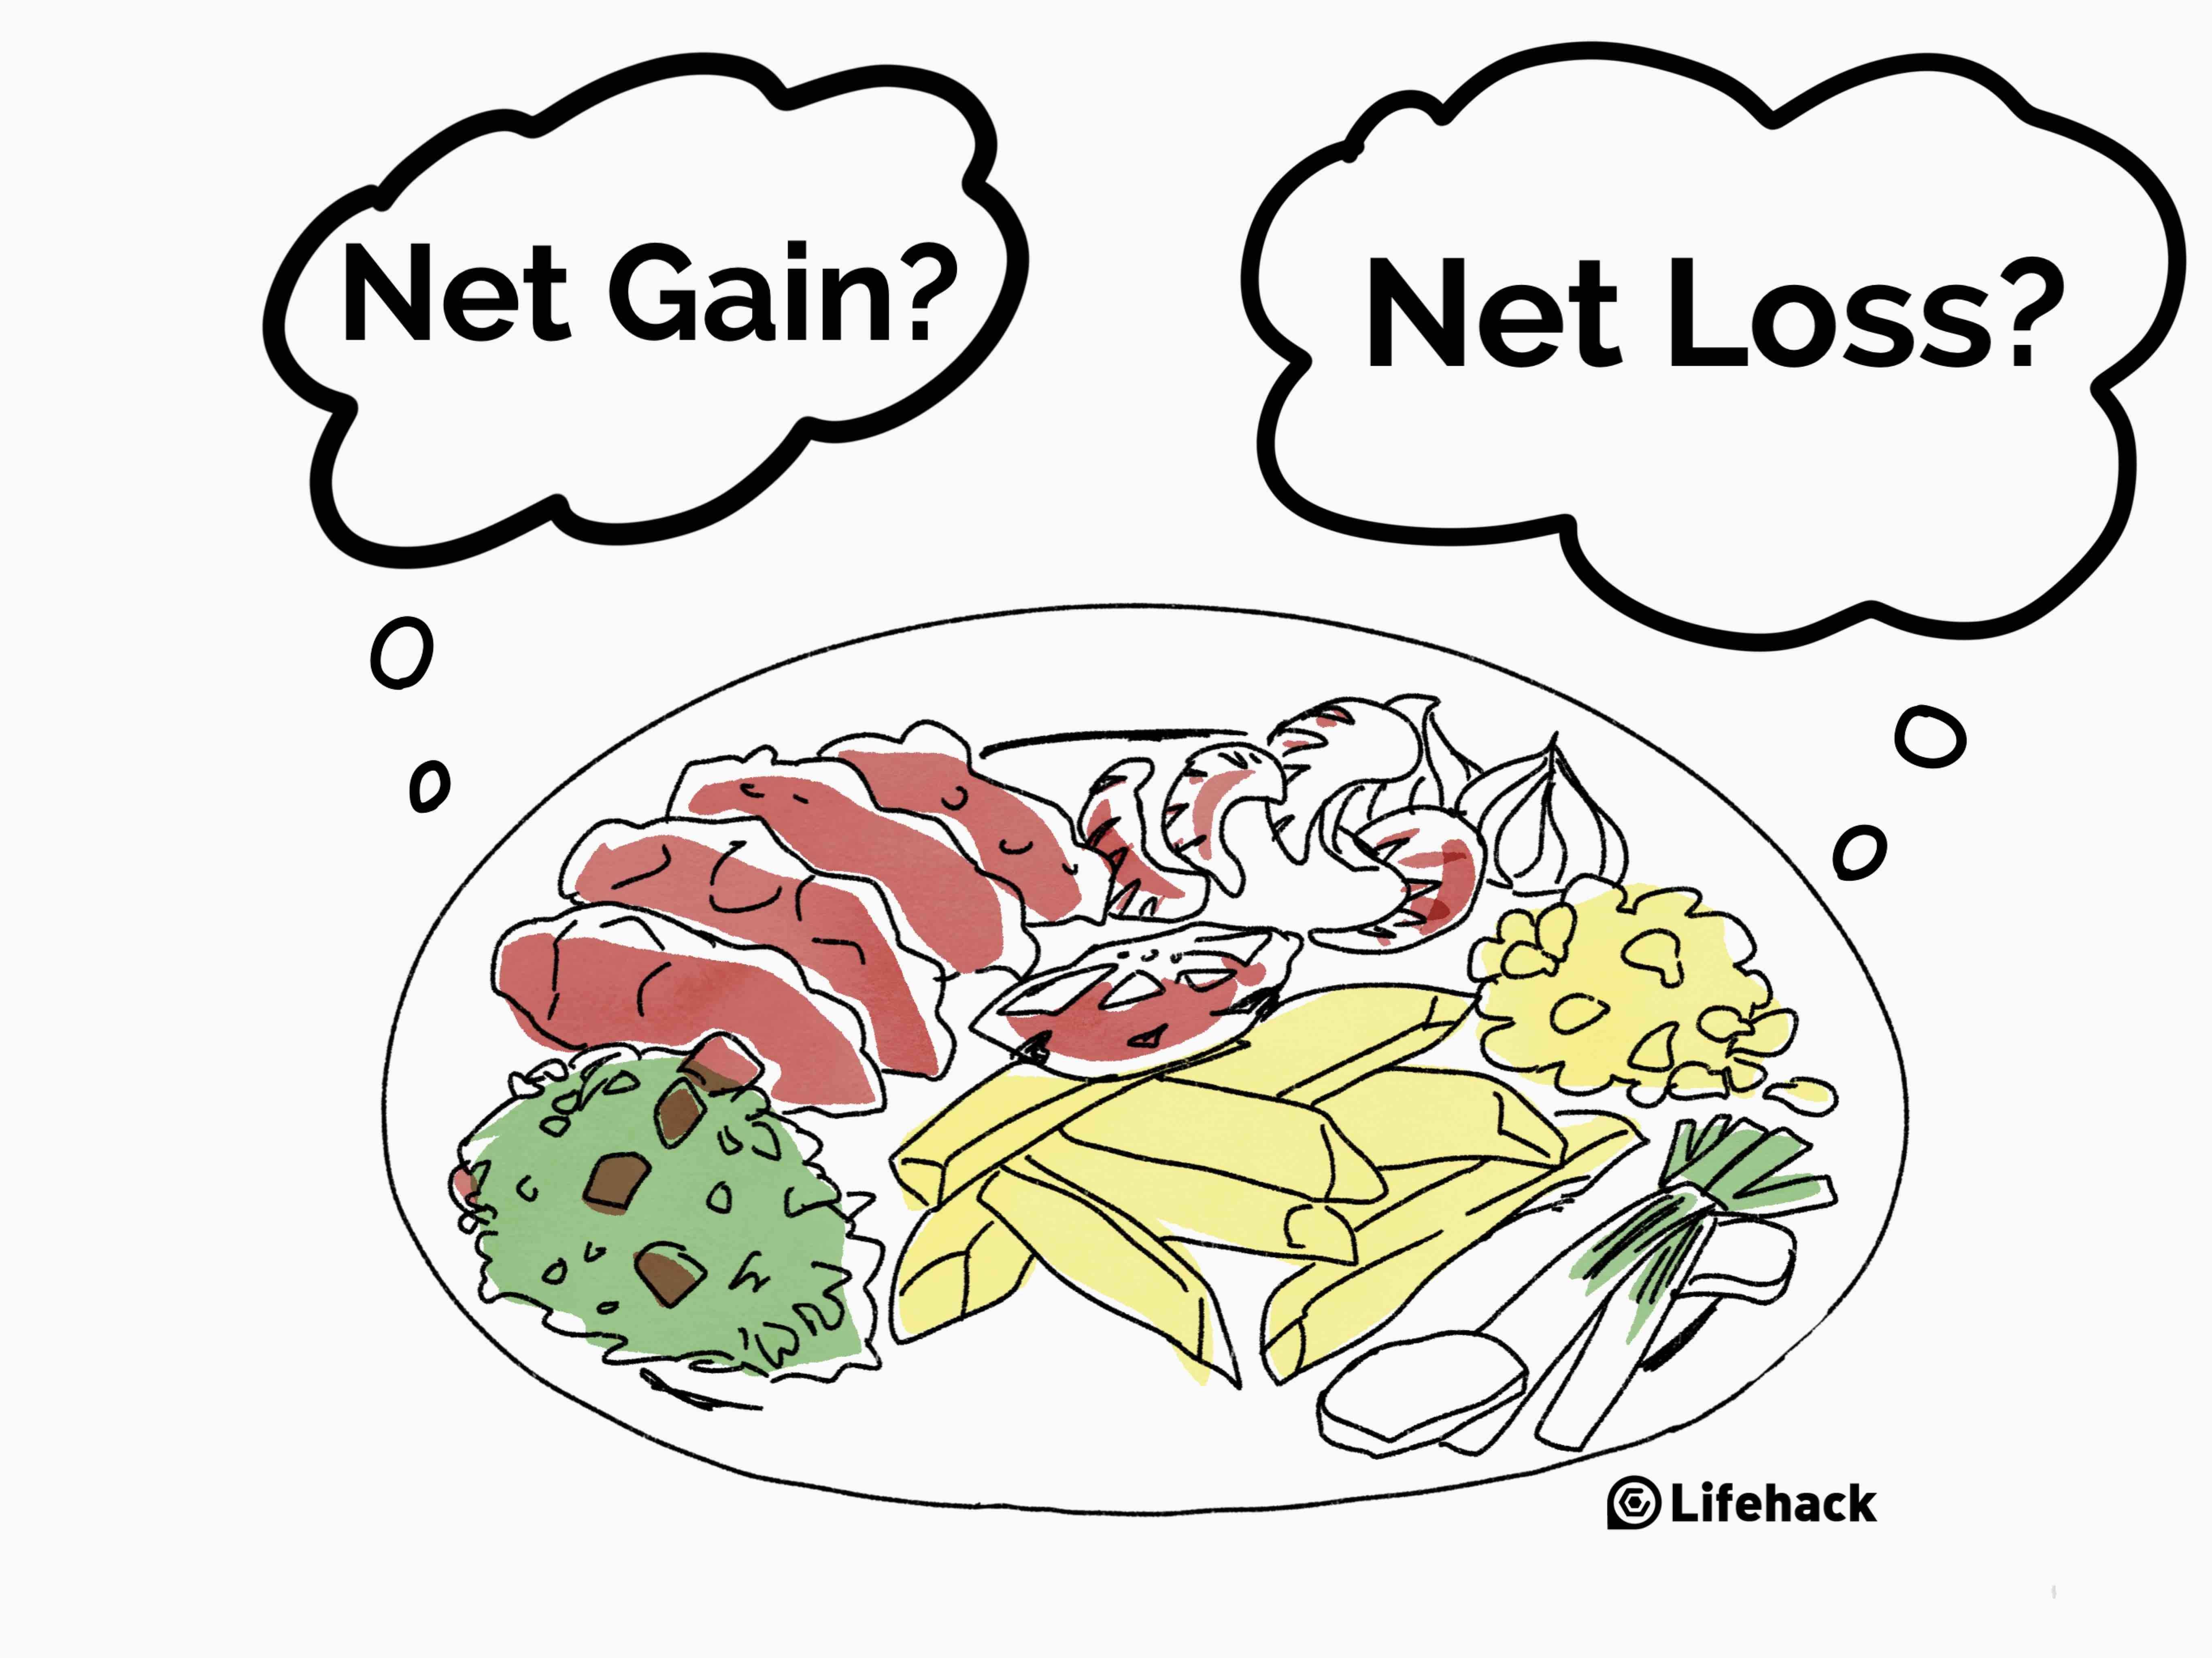 What If You Can Calculate the Net Gain and Loss of Your Health?